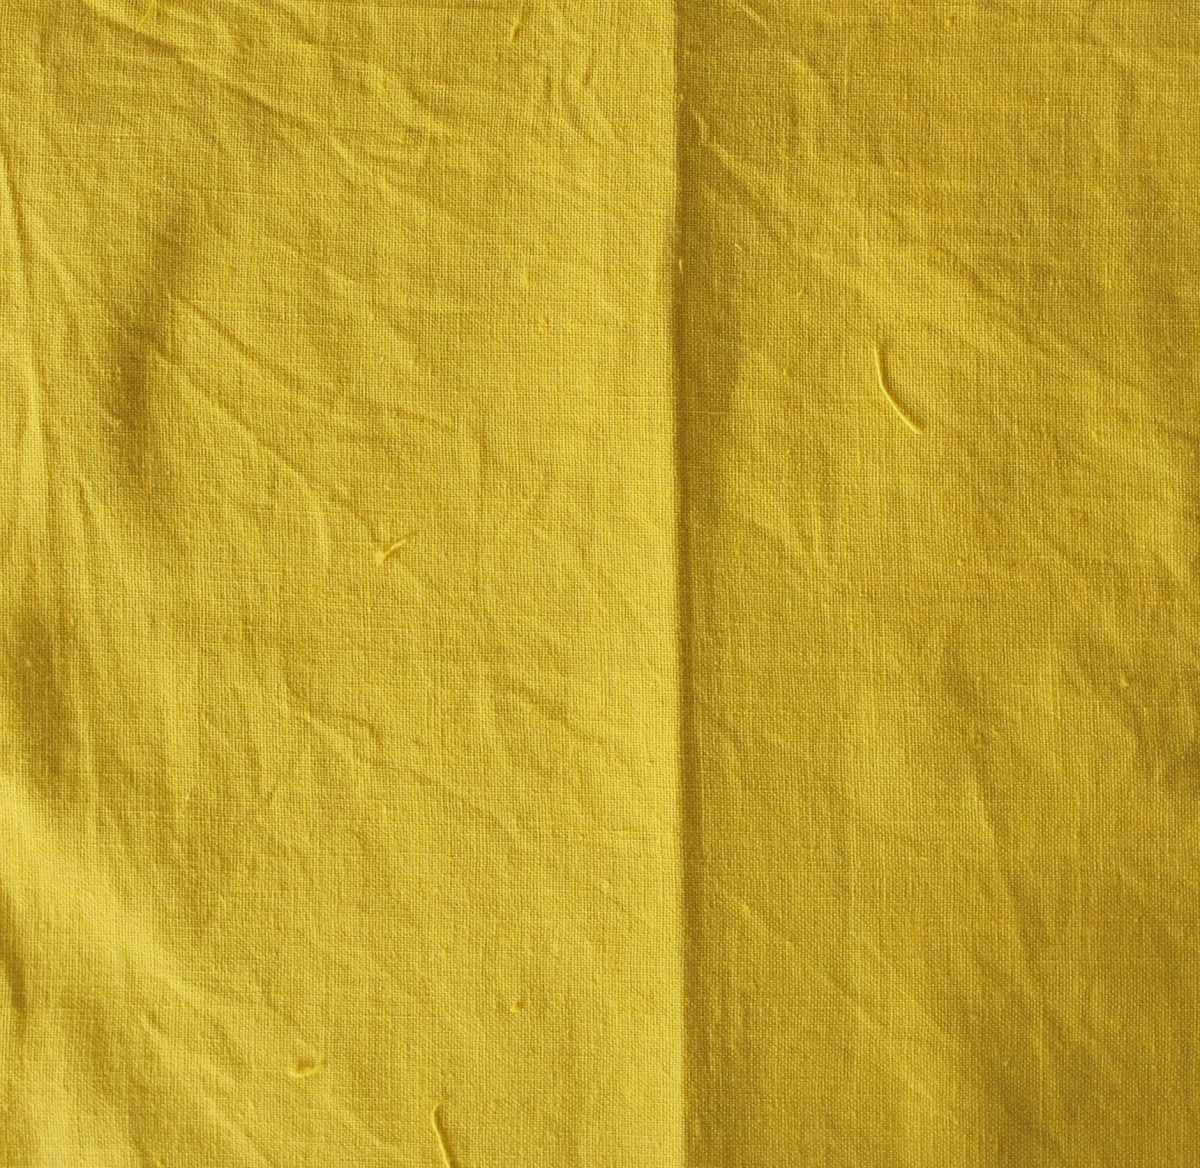 Direct Yellow 12 for dyeing paper